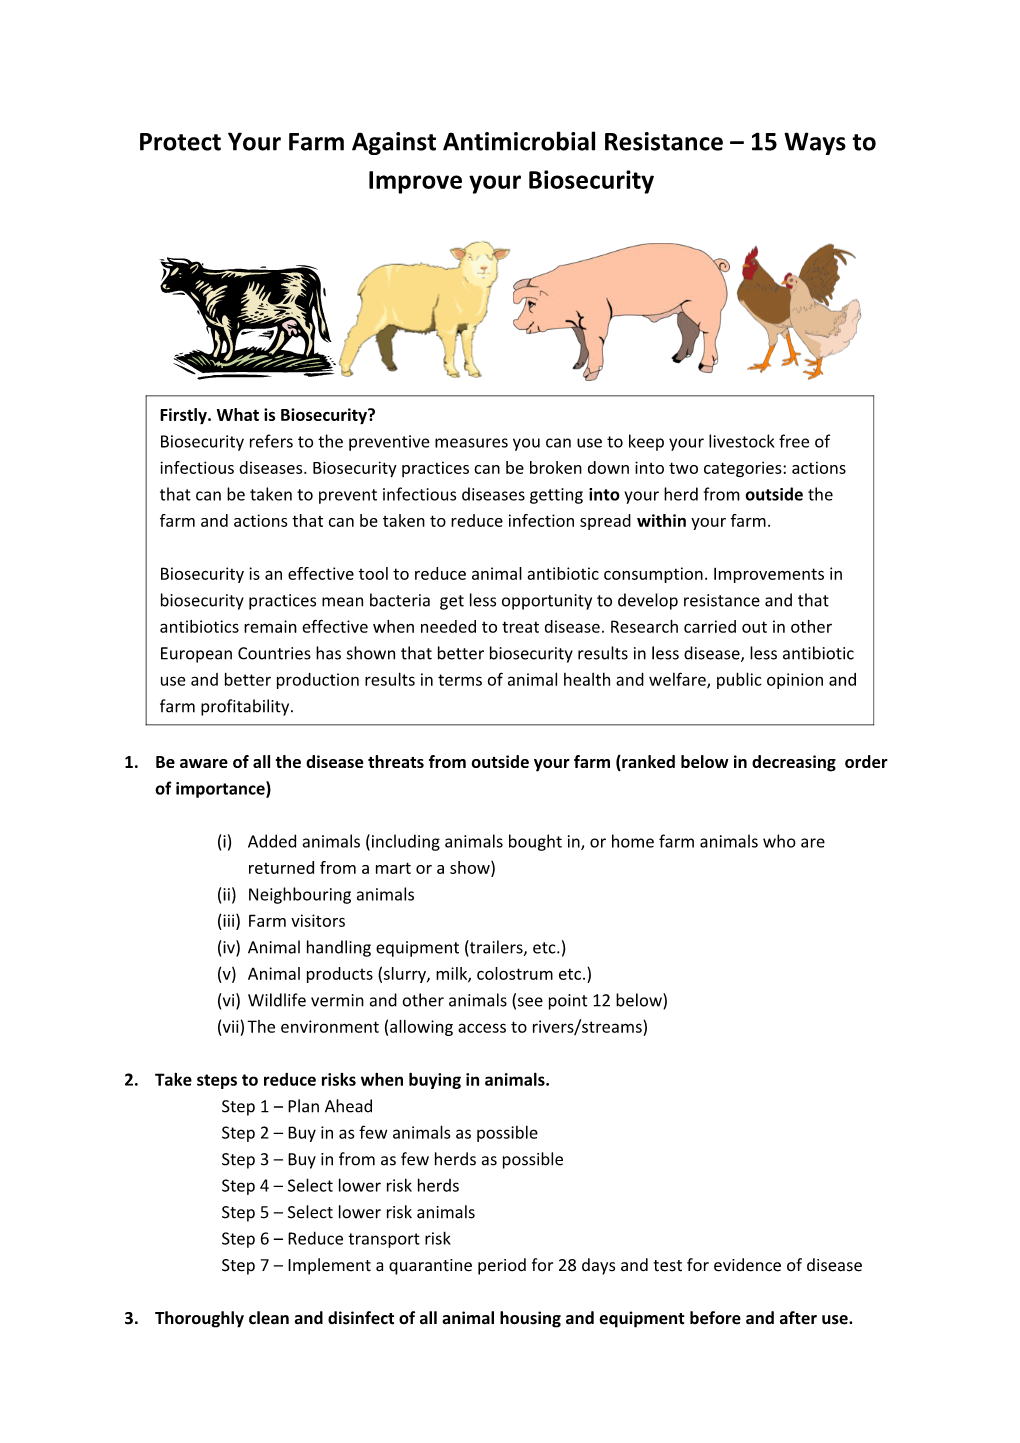 Protect Your Farm Against Antimicrobial Resistance 15Ways To